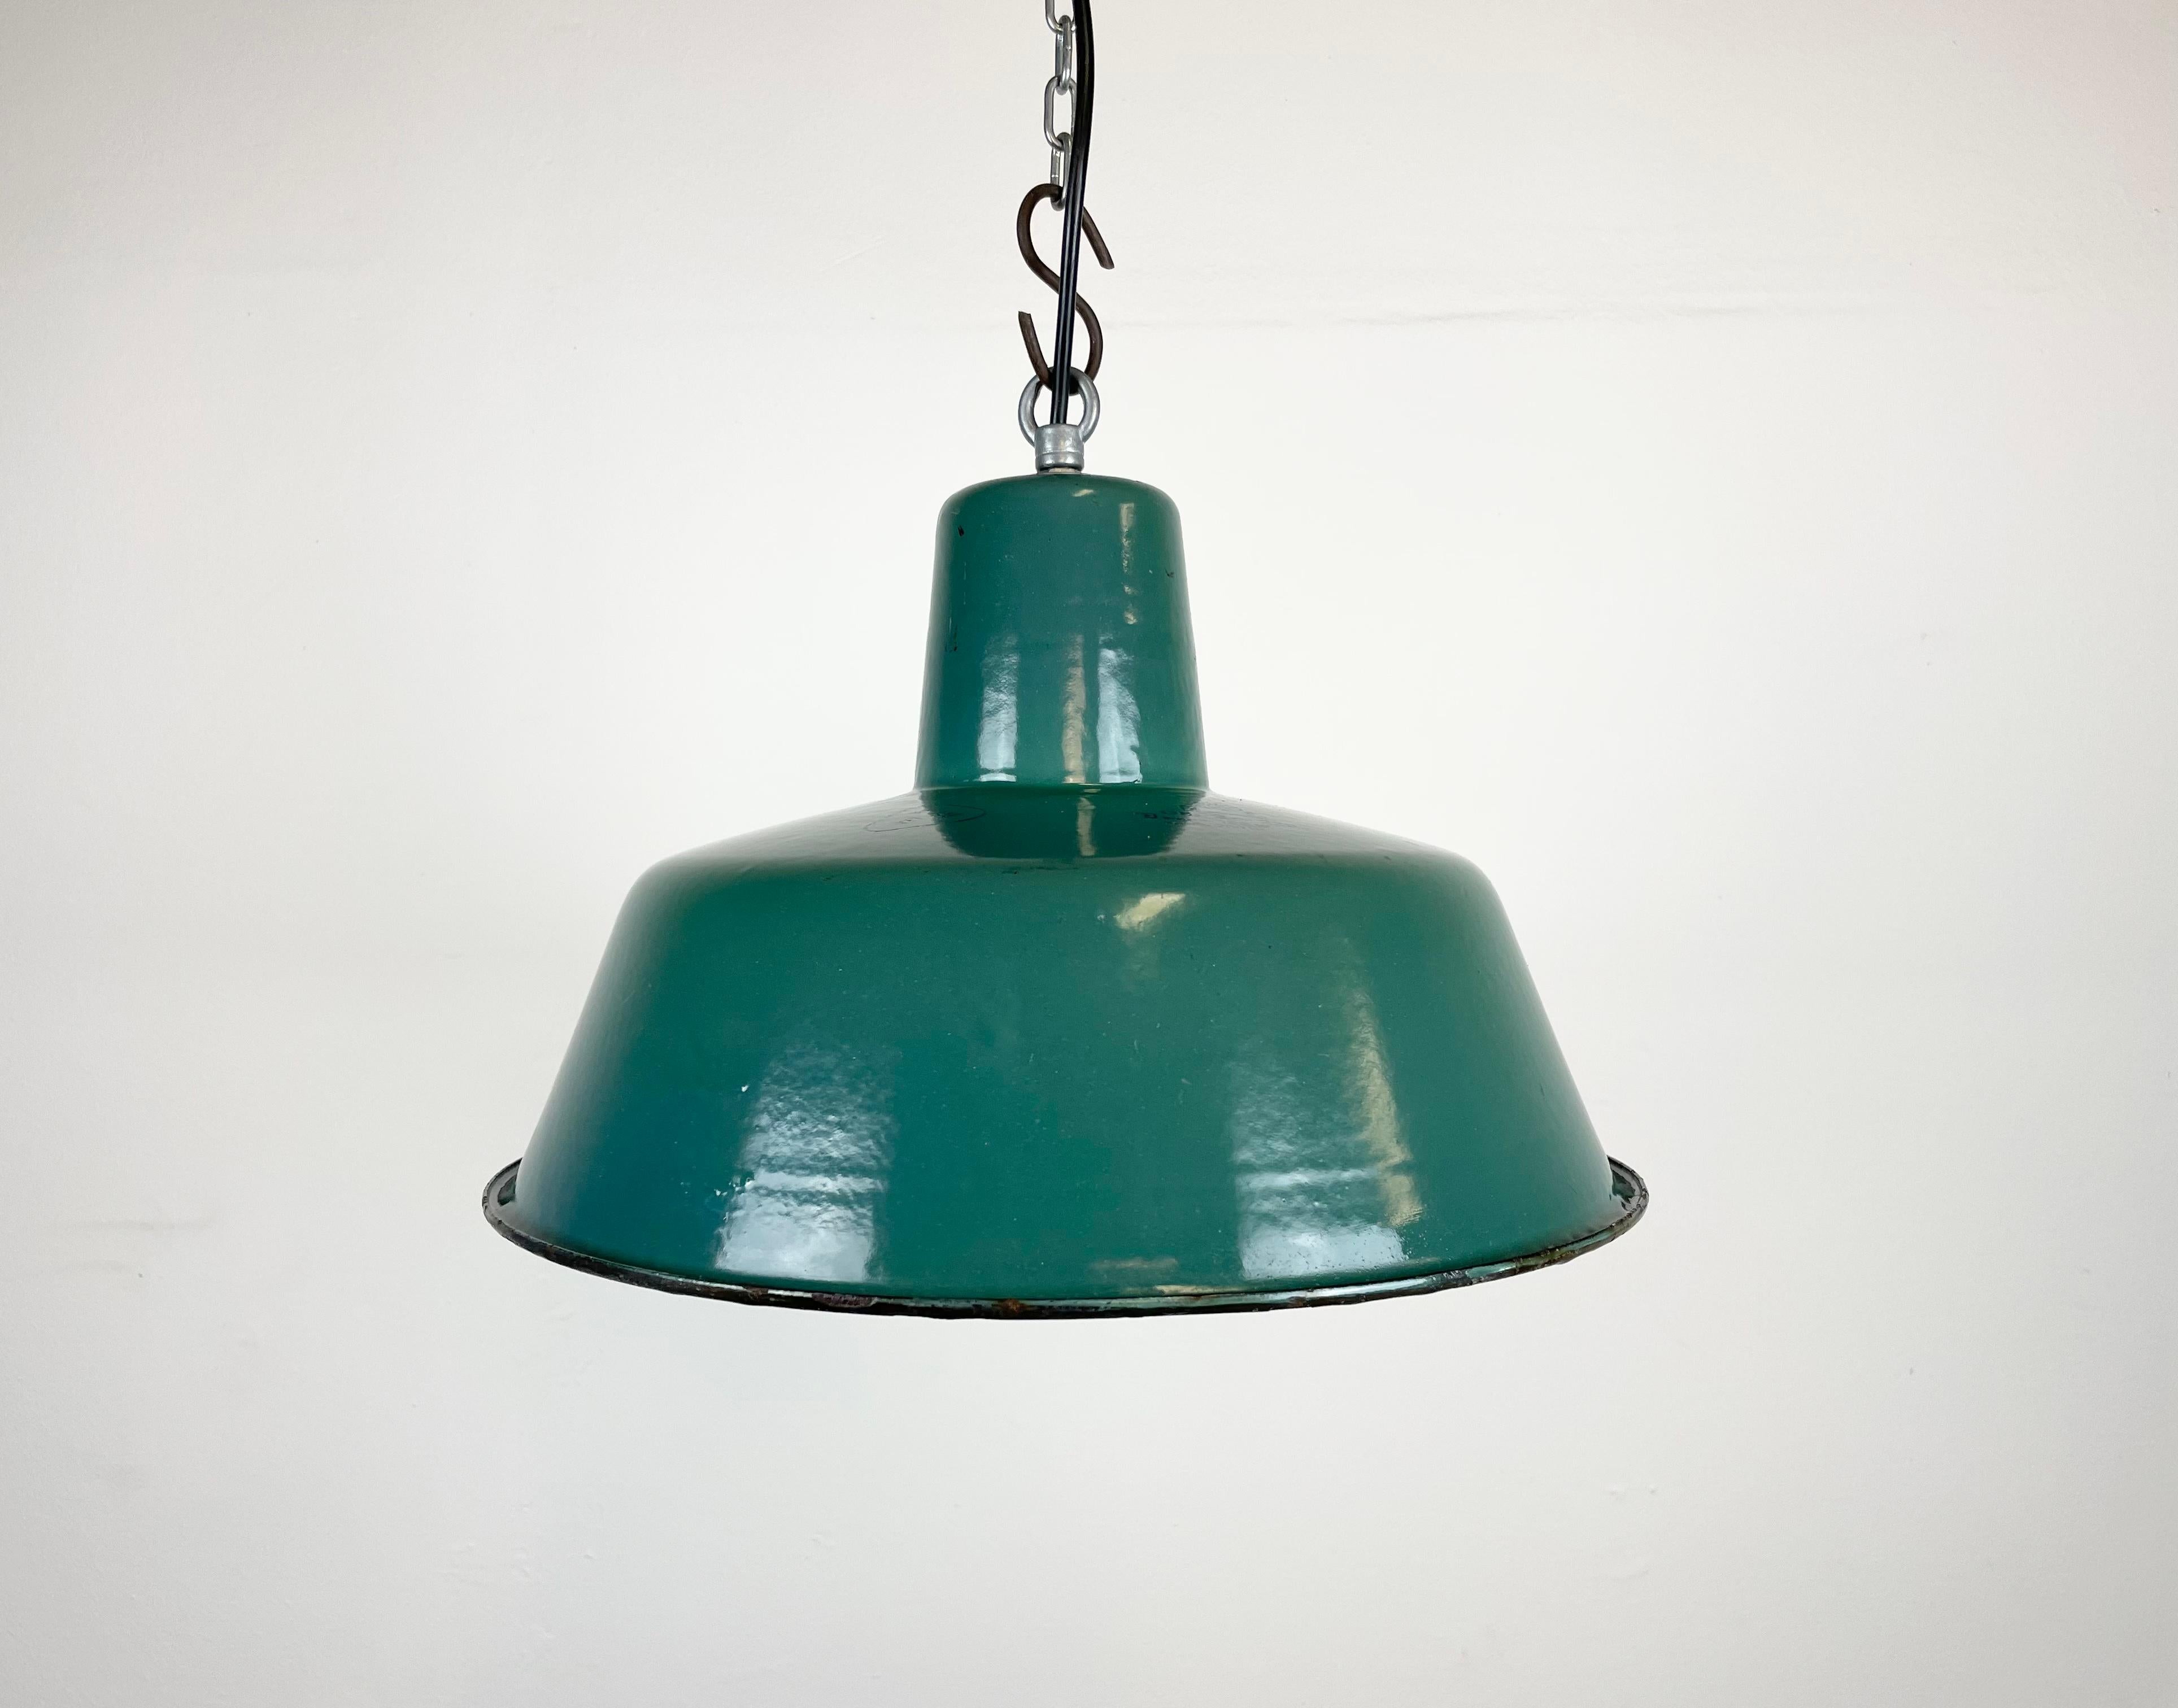 Industrial green enamel pendant light made by KWE in Poland during the 1960s. White enamel inside the shade. Iron top. The porcelain socket requires E 27 light bulbs. New wire. Fully functional. The weight of the lamp is 1,2 kg.